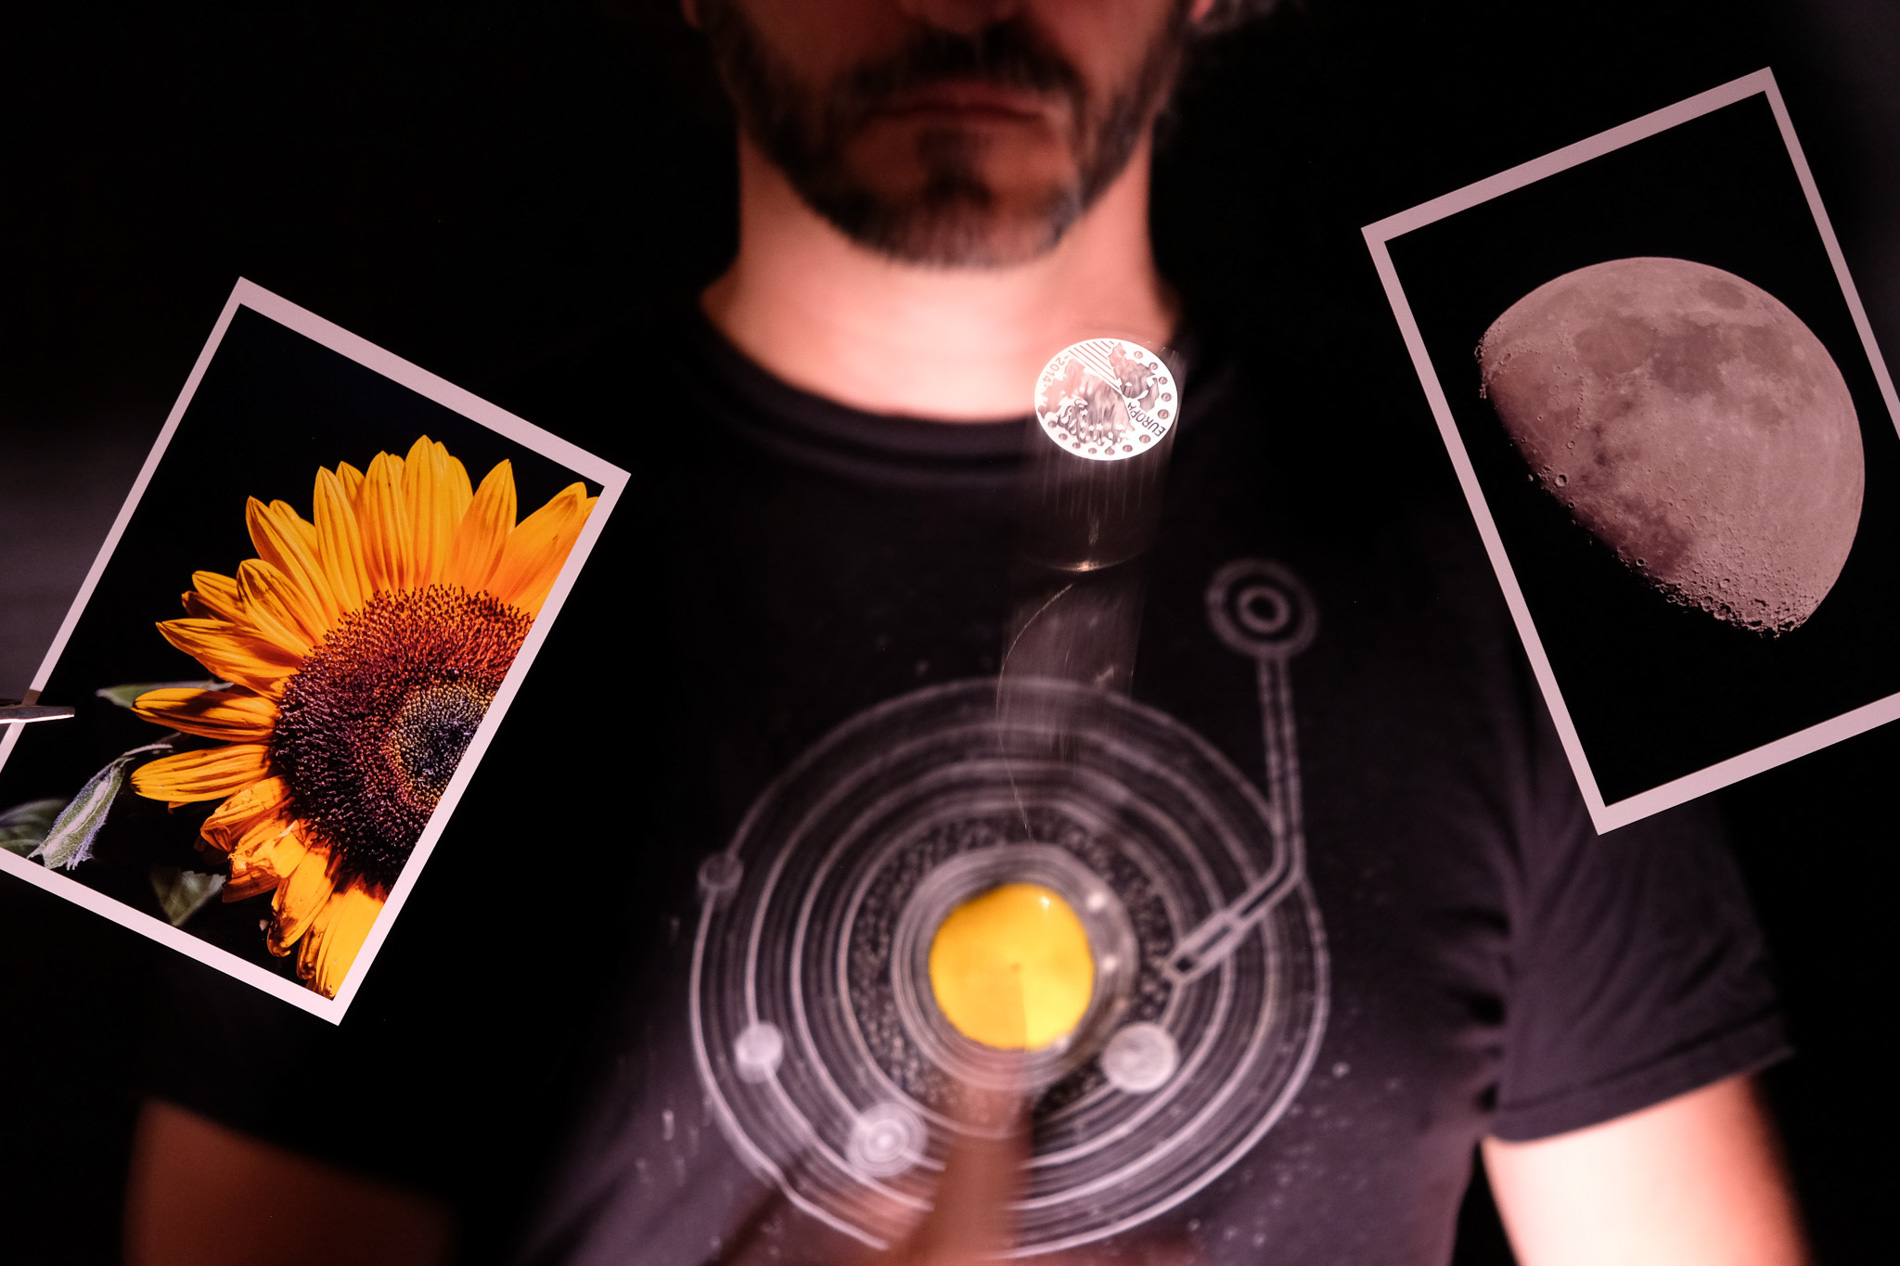 Man wearing tshirt with solar system, holding photos of sunflower and moon, photography by Maayan Windmuller